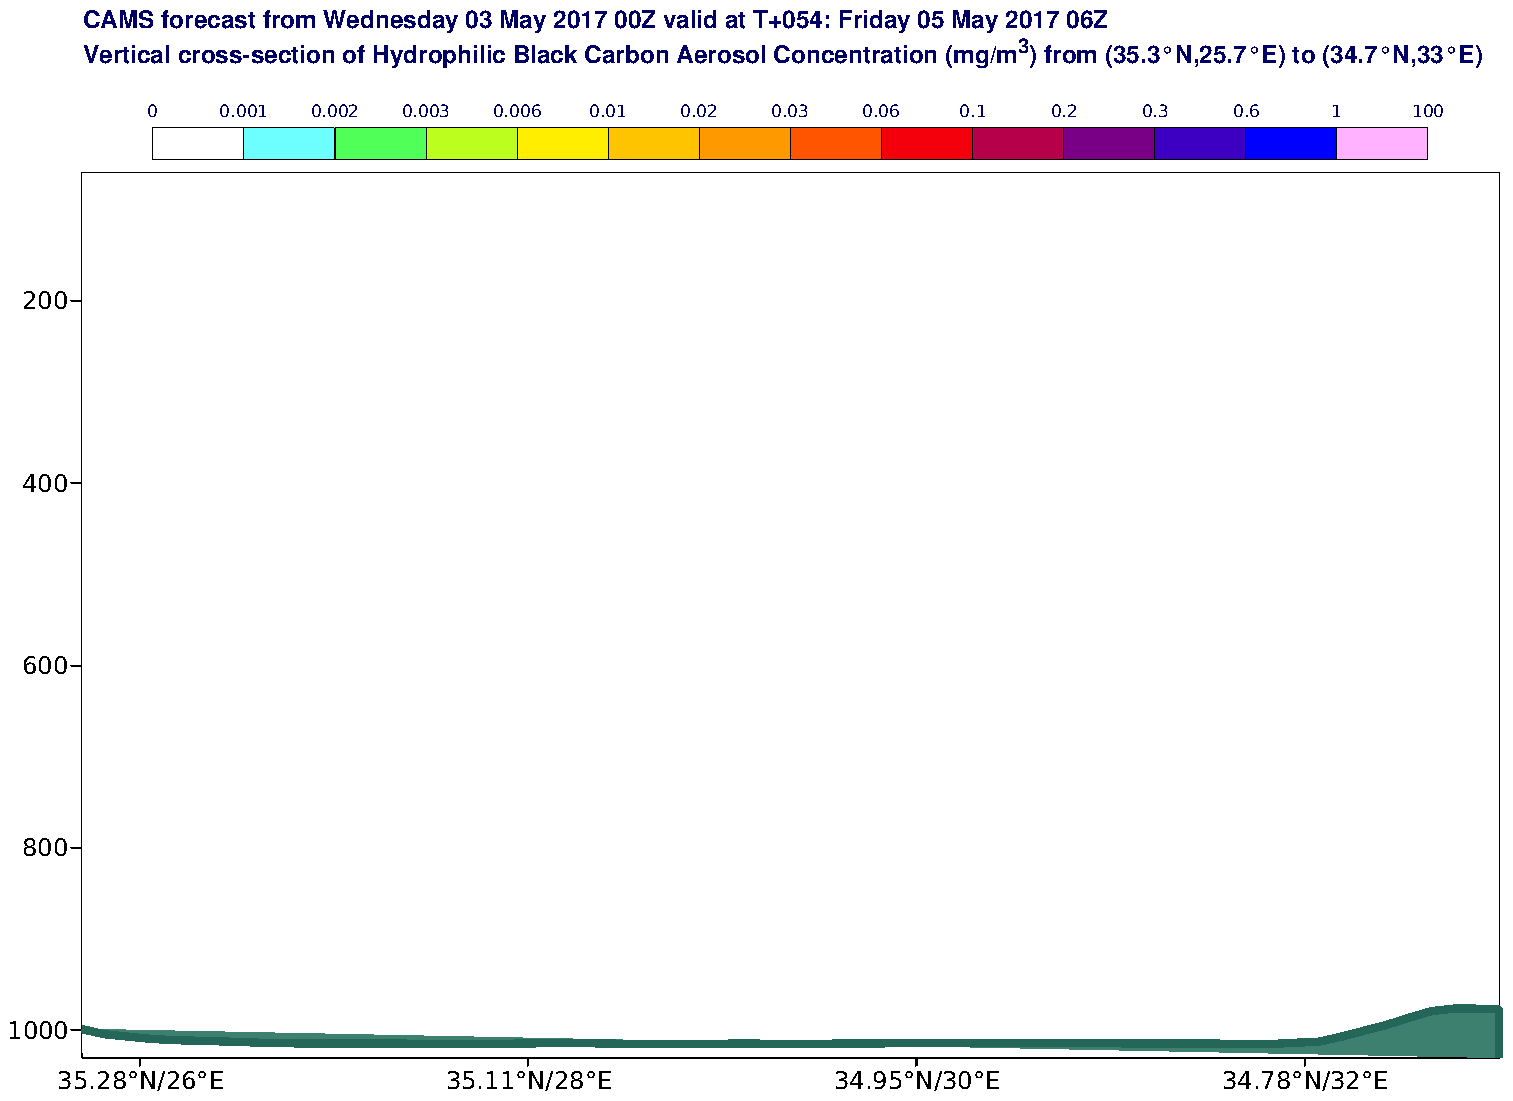 Vertical cross-section of Hydrophilic Black Carbon Aerosol Concentration (mg/m3) valid at T54 - 2017-05-05 06:00